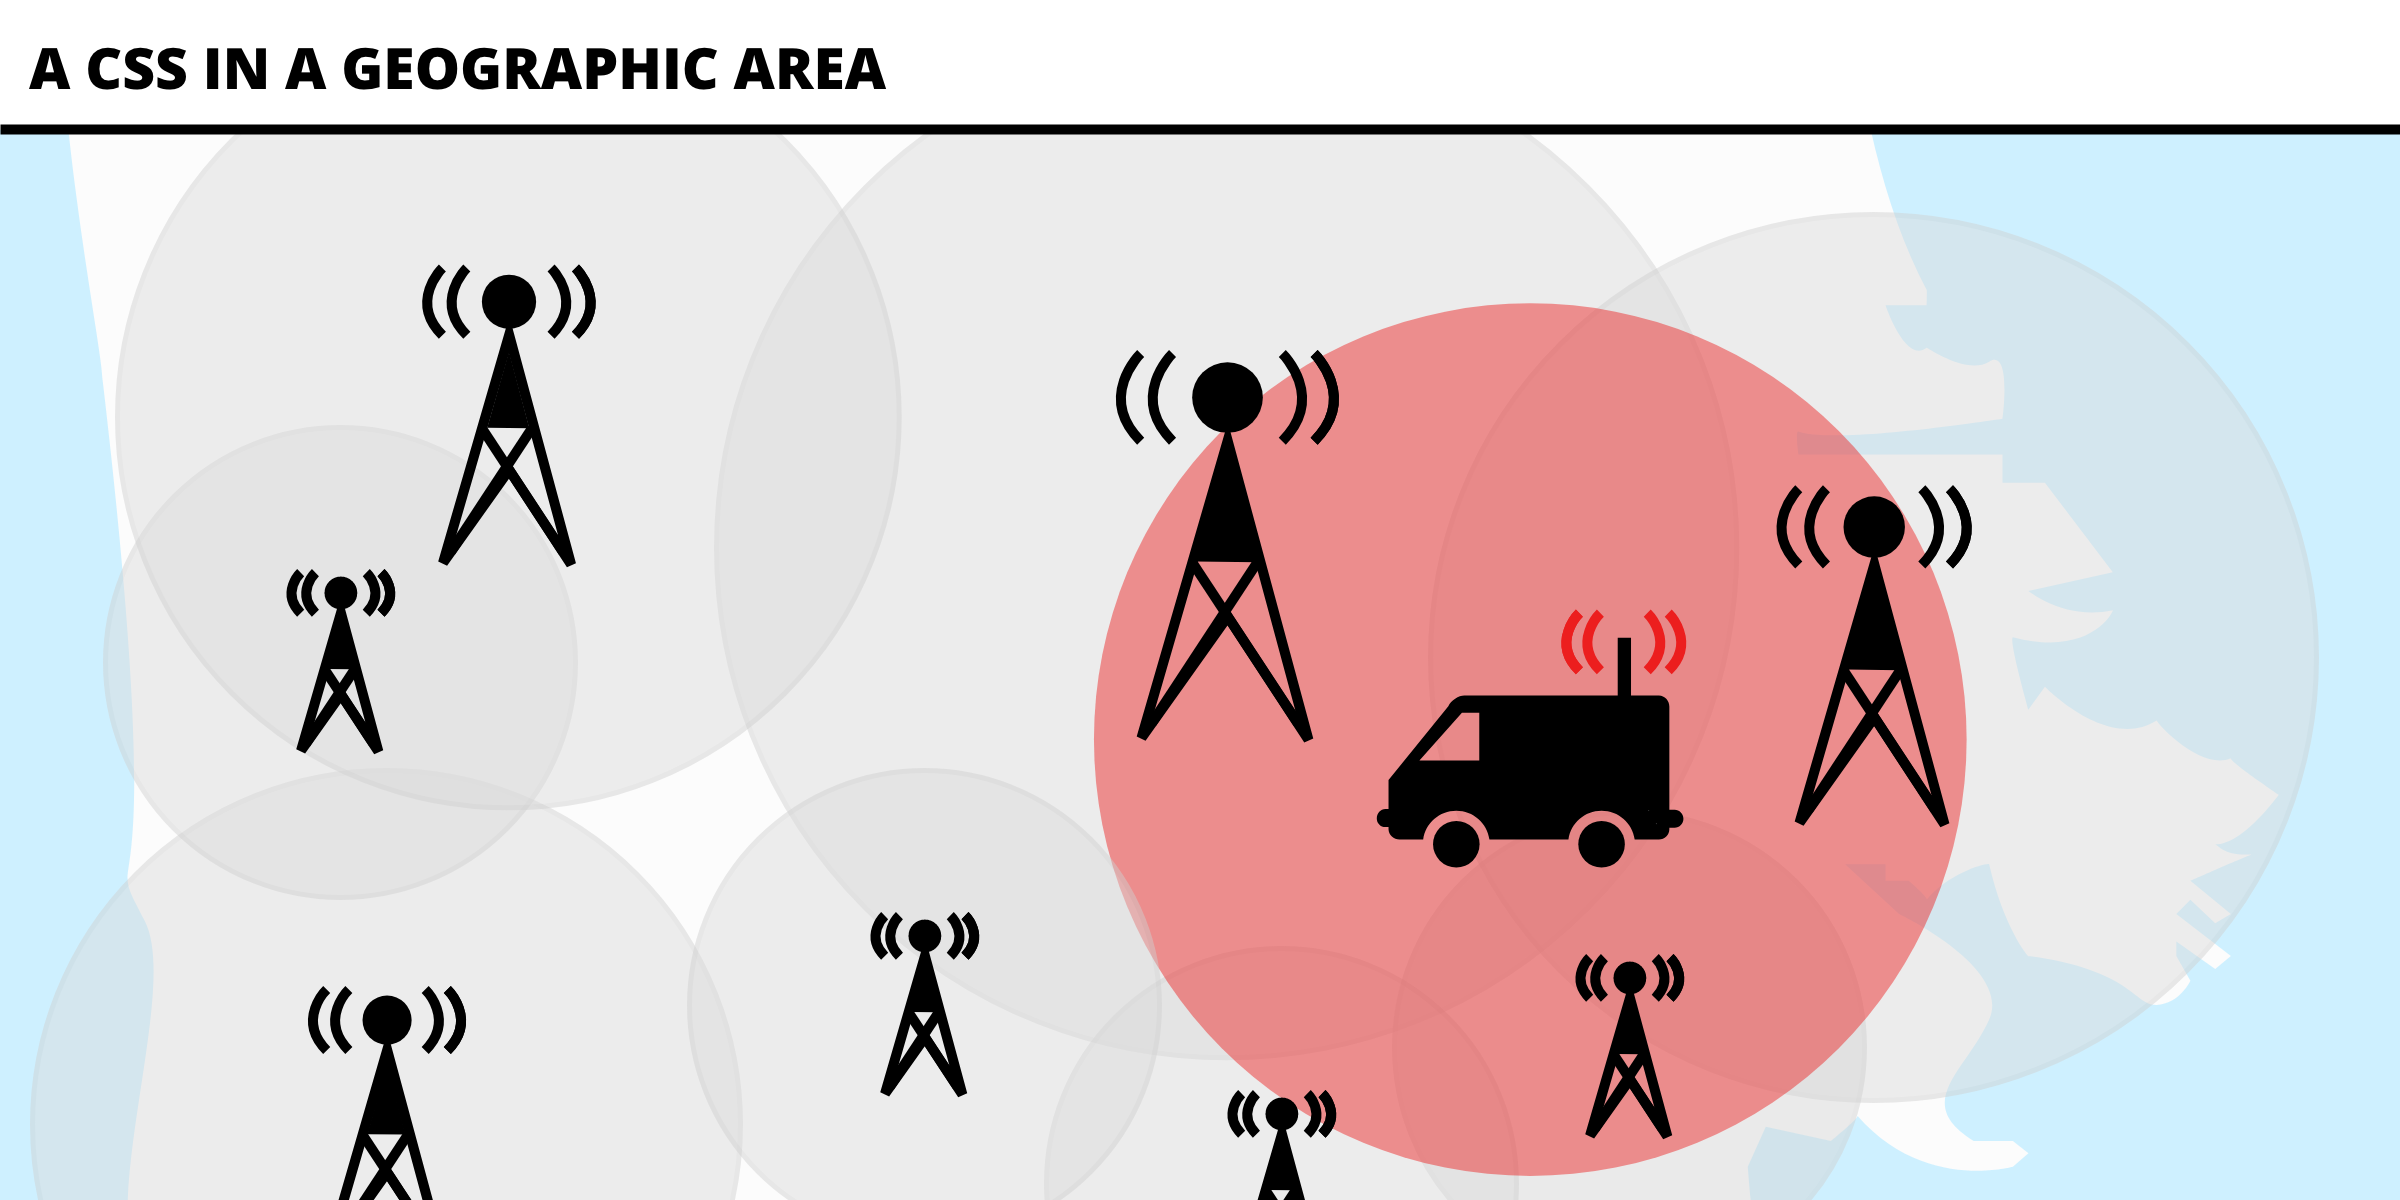 Cell towers are shown on a map, each with gray circles radiating out from them. A CSS (which is depicted here as a truck with a signal) emanates a red circle overlapping with the other cell tower circles.